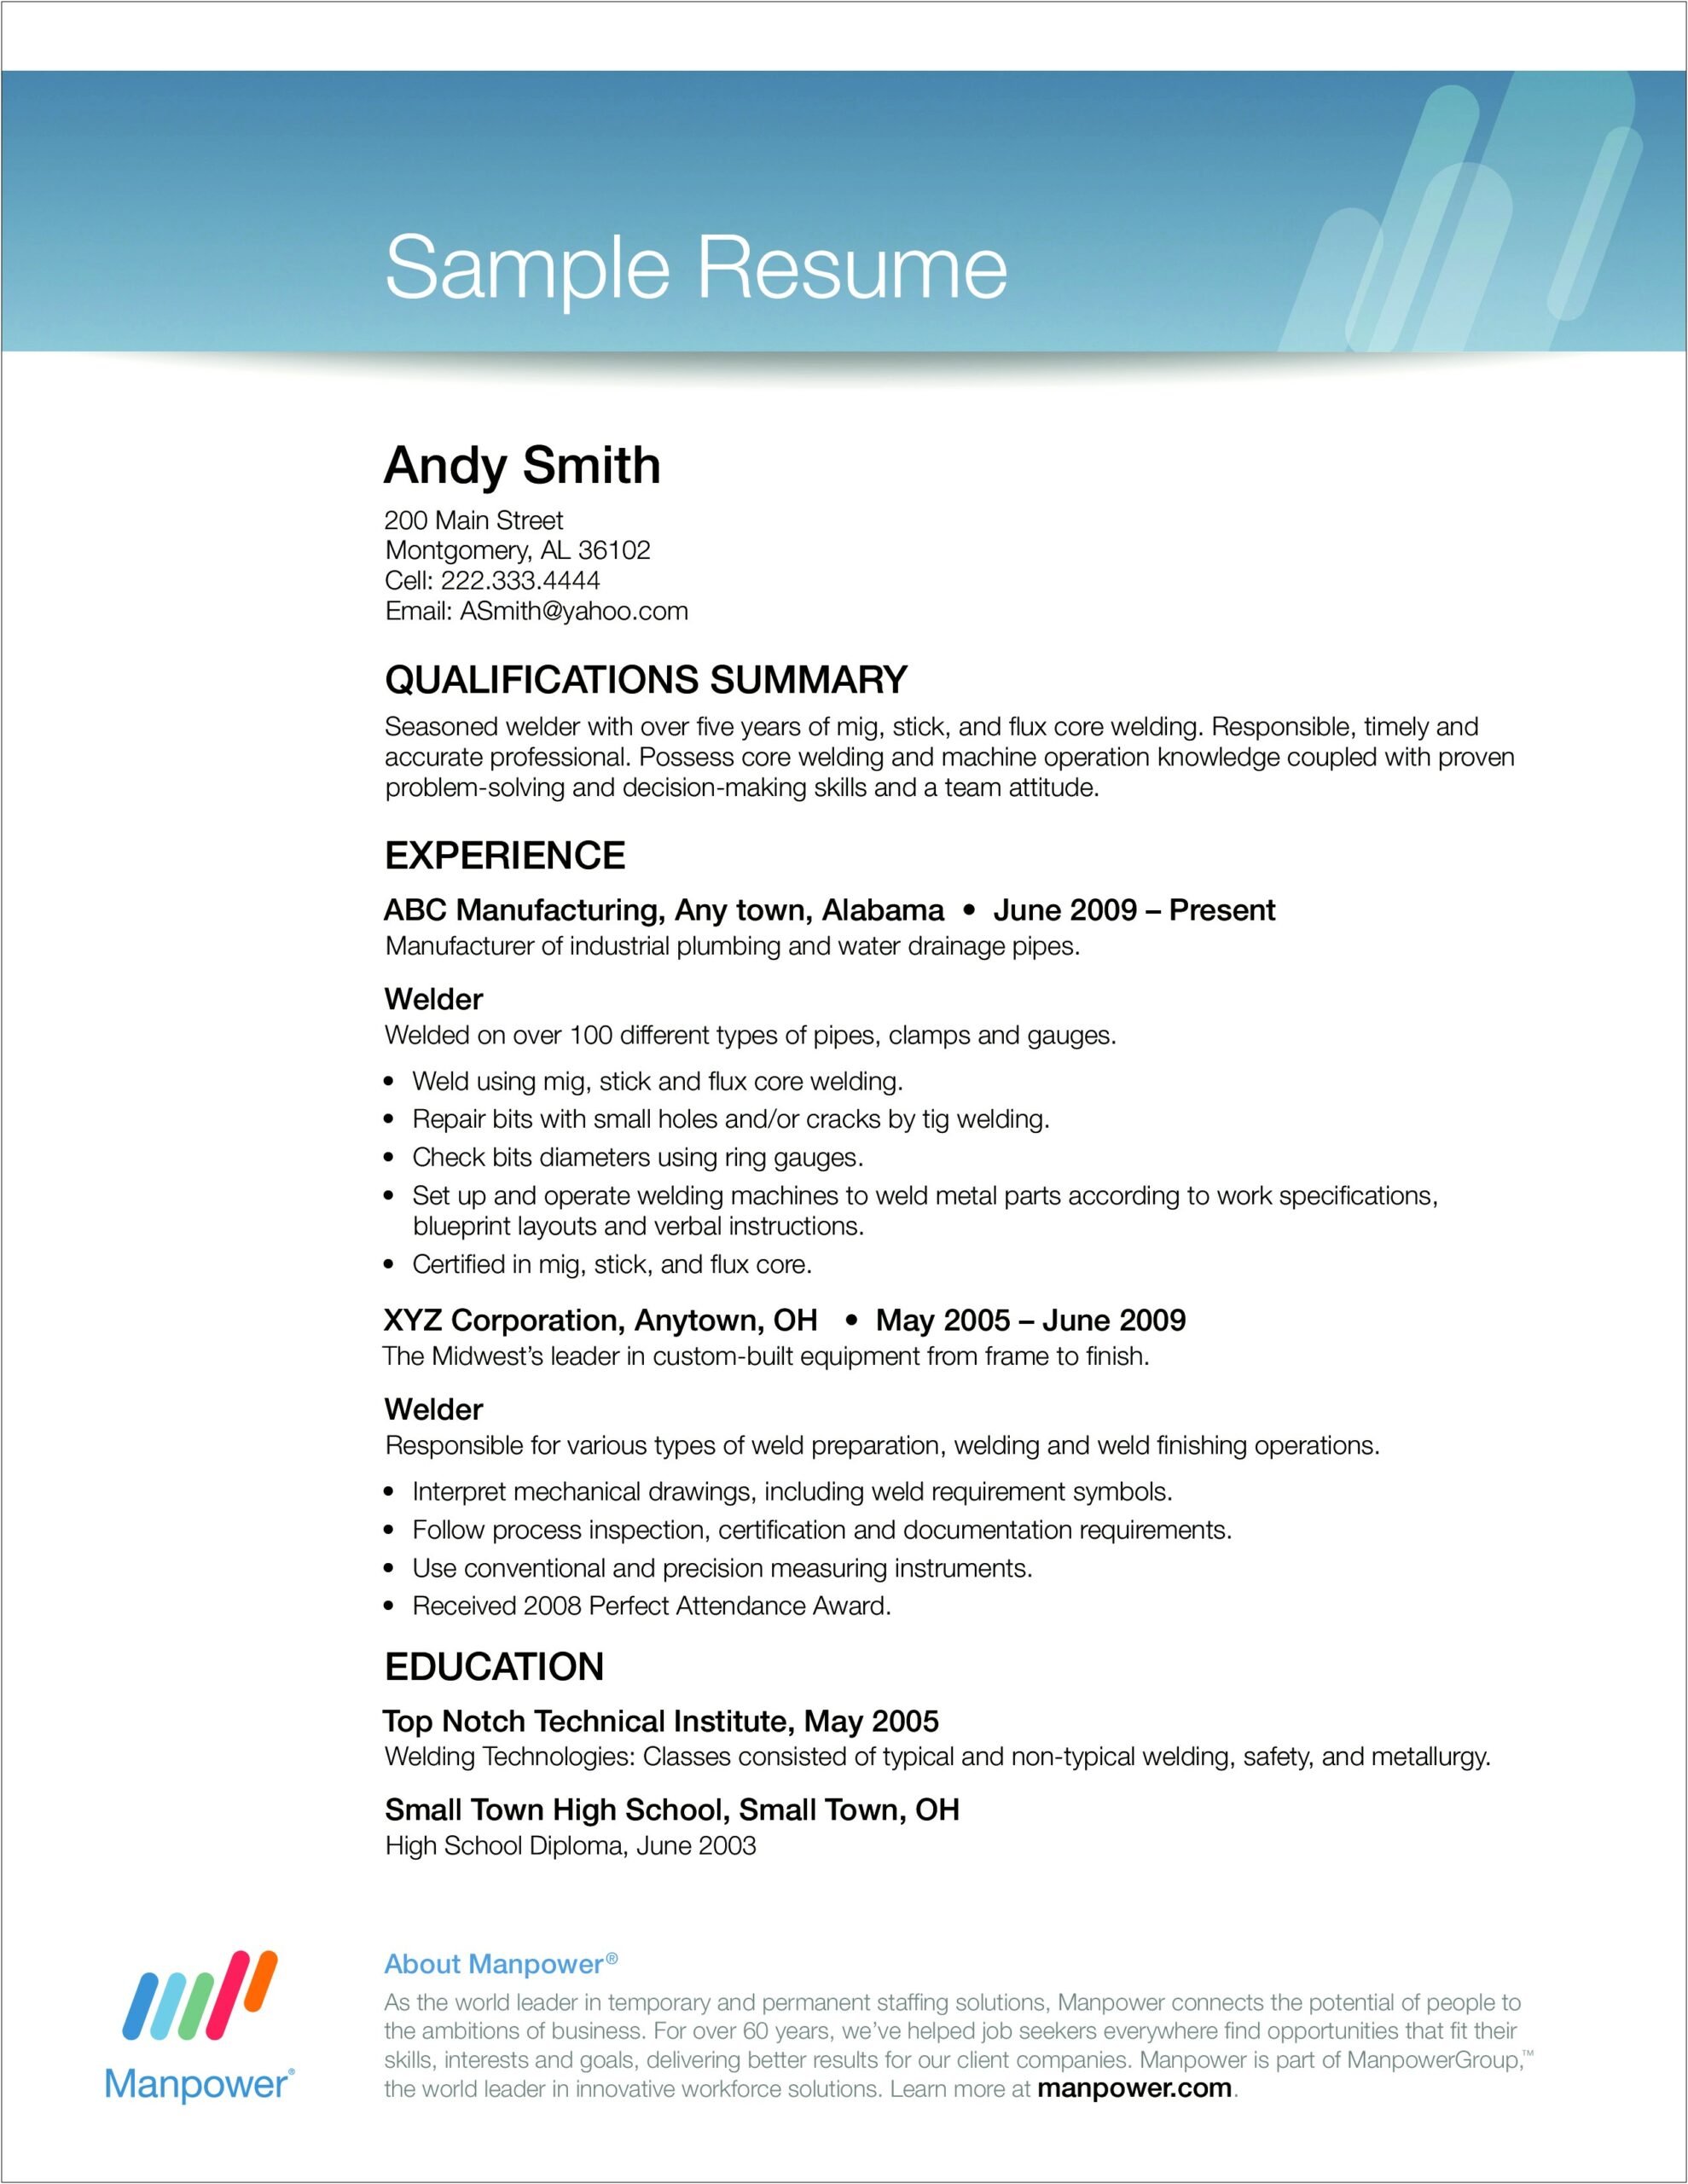 Types Of Technical Skills For Resume